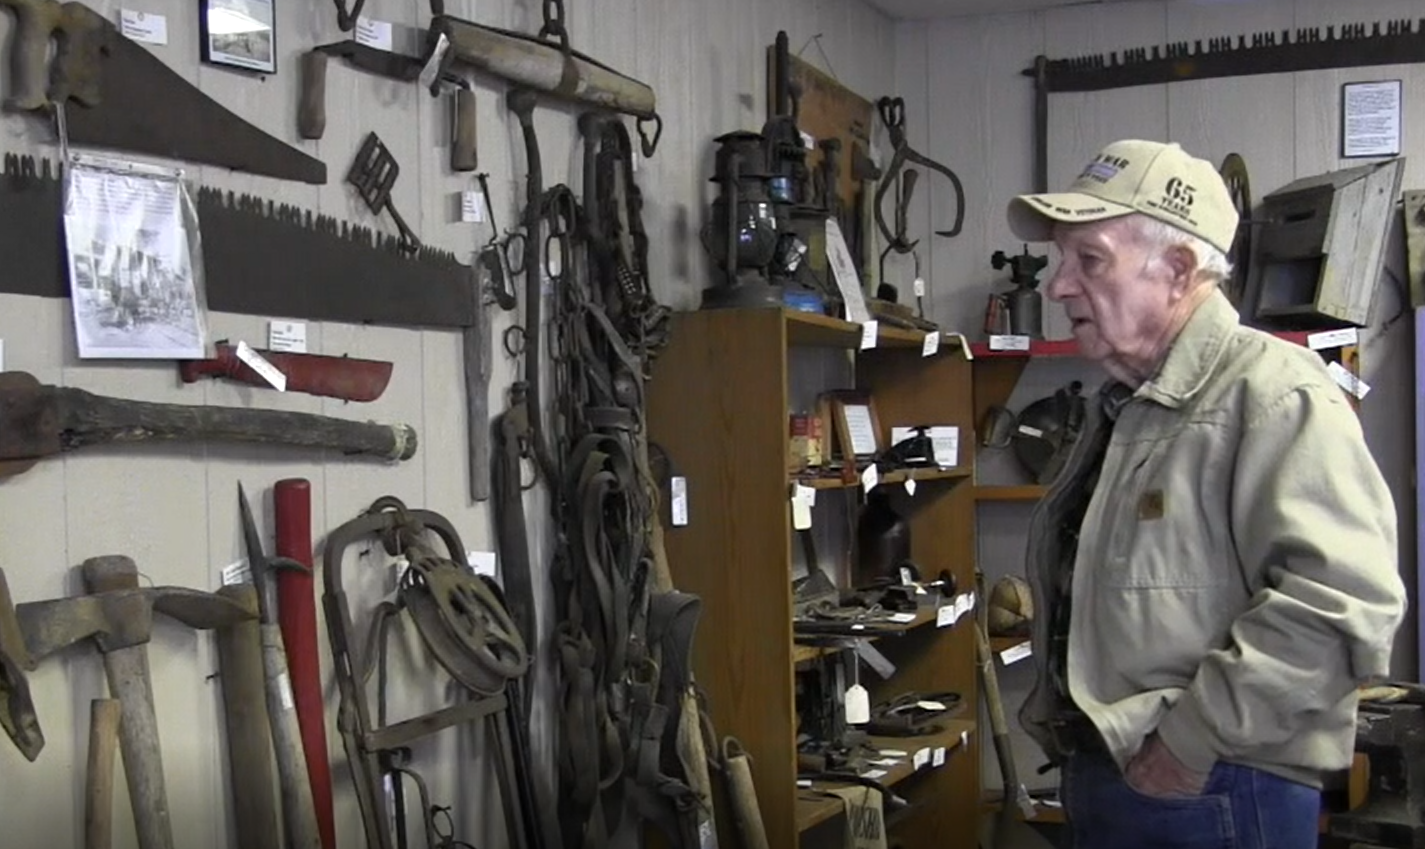 An older man in a tan ball cap and a jacket looks over a wall in a museum that displays old tools, saws, axes, and more.